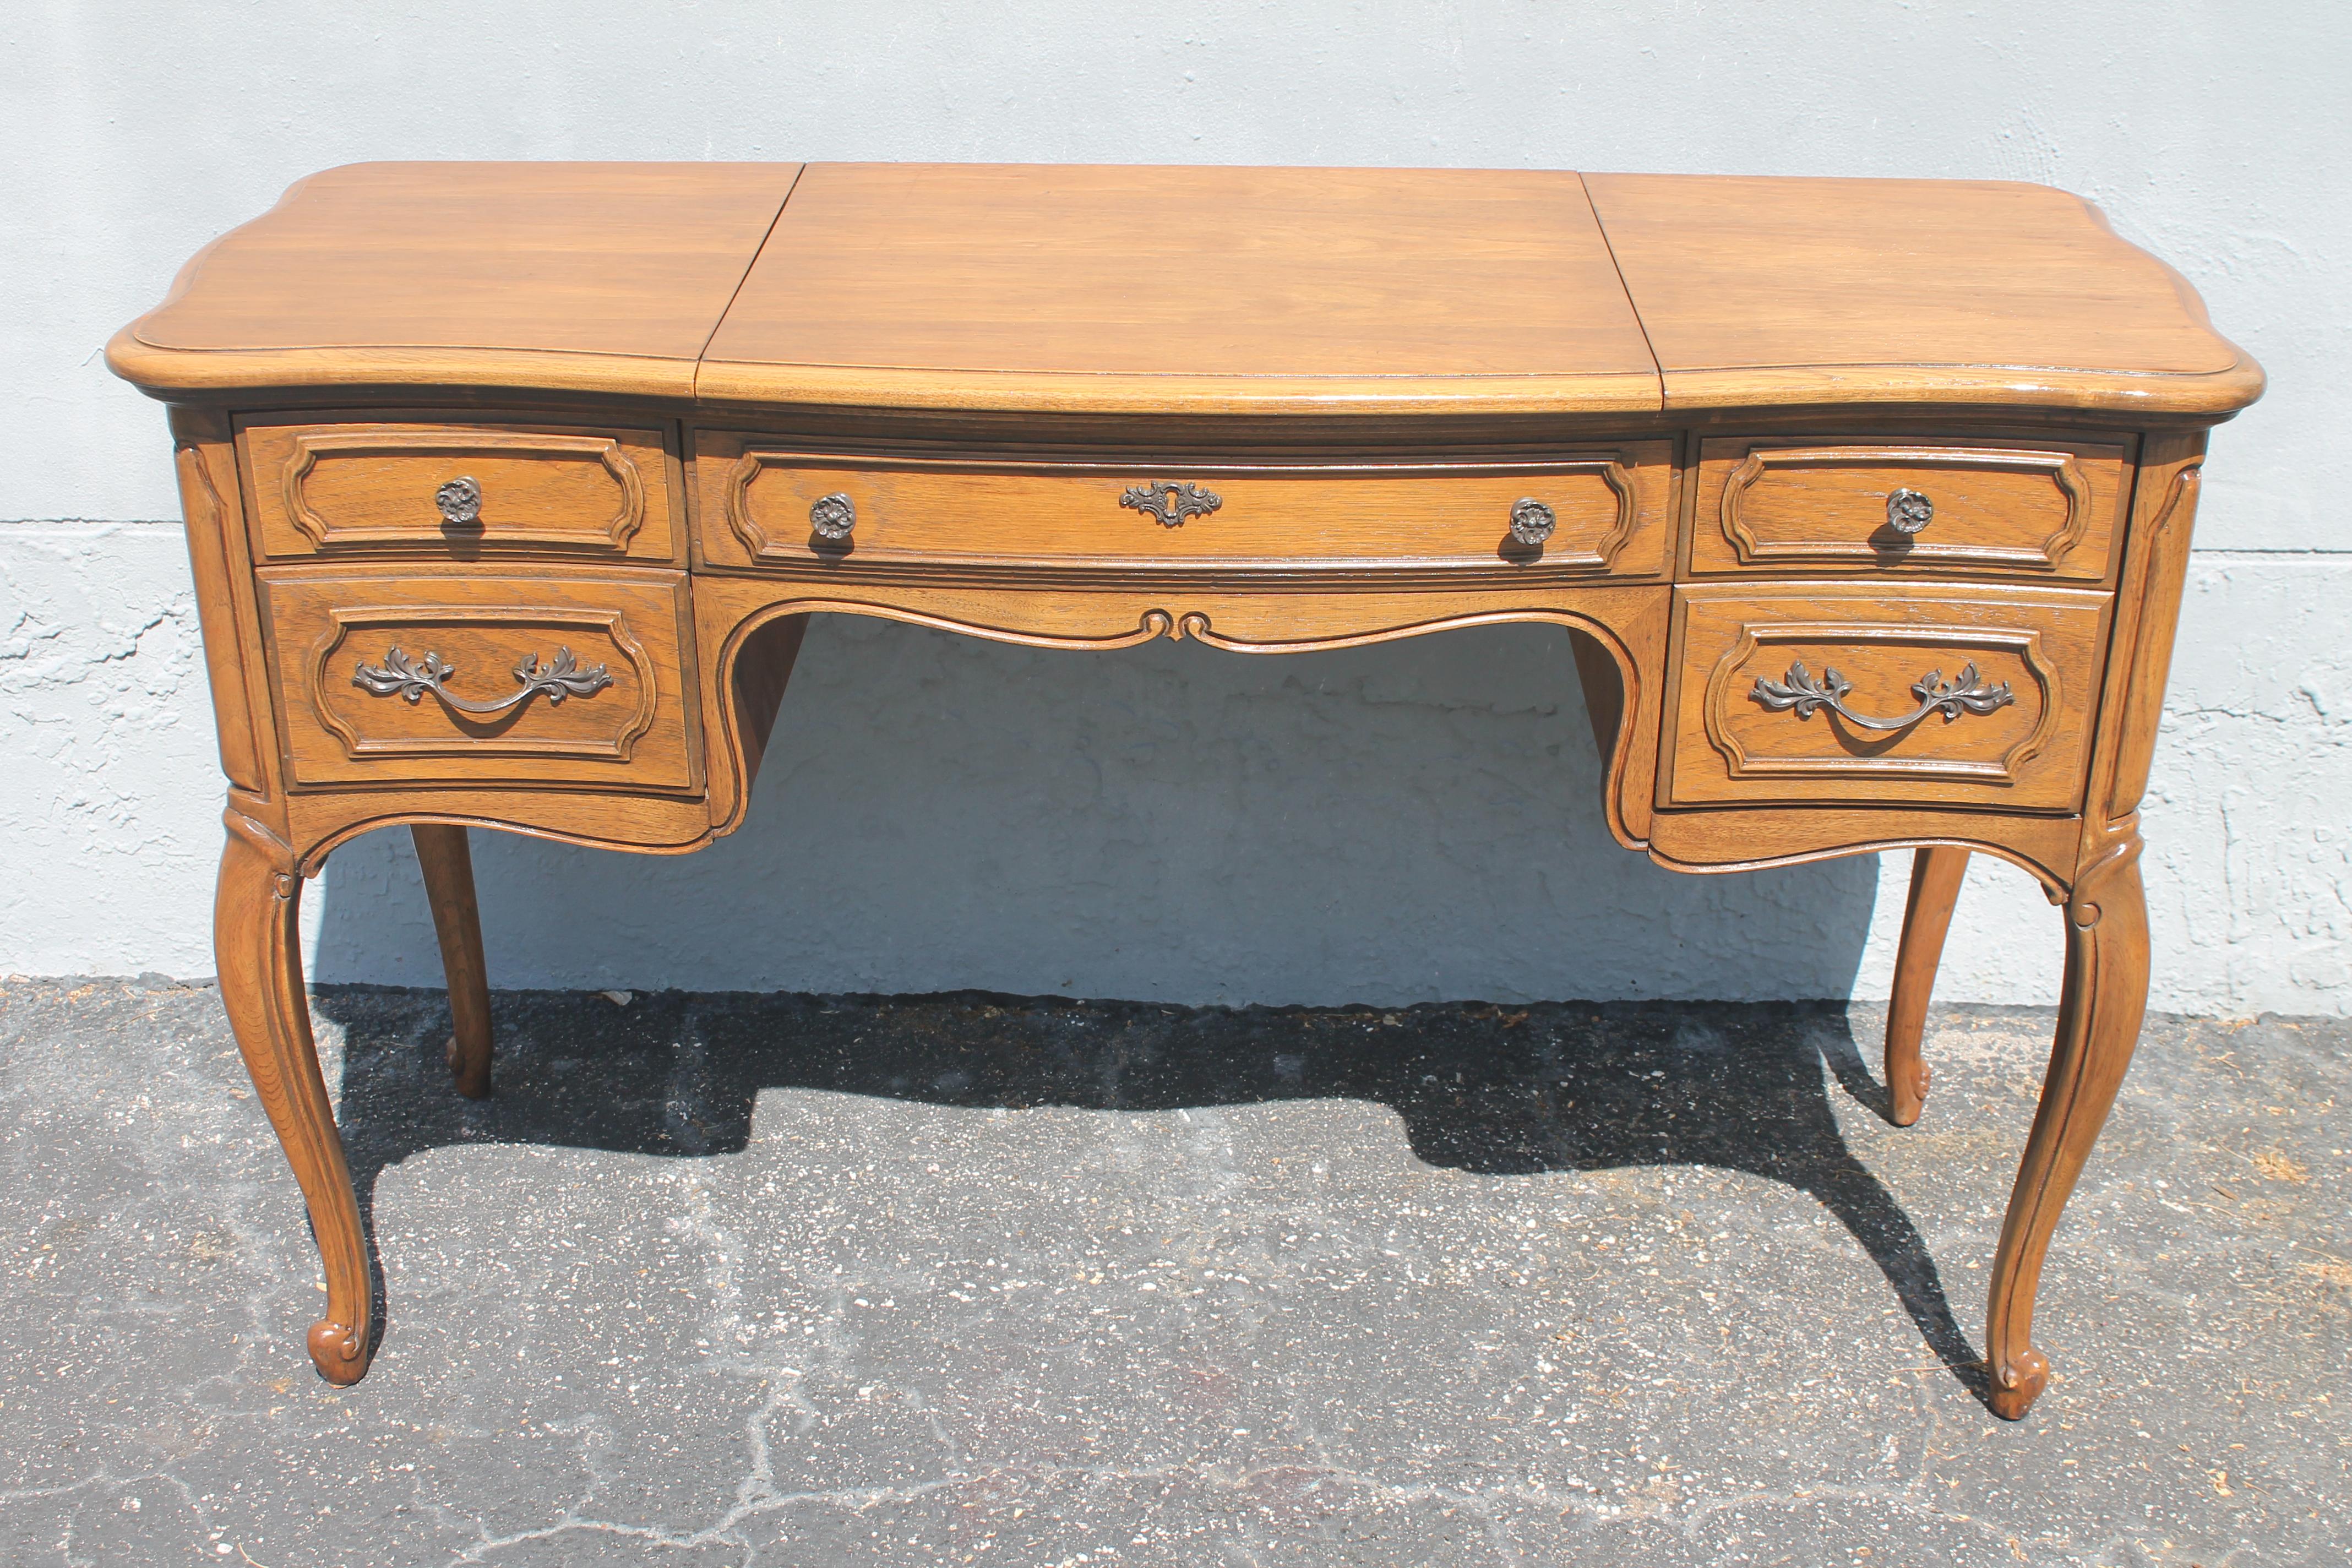 1940's French Provincial Ladies Vanity/ Dresser by Thomasville. Great storage drawers. 3 drawers with one under the miiror and compartment. Beautiful vanity built with excellent quality.